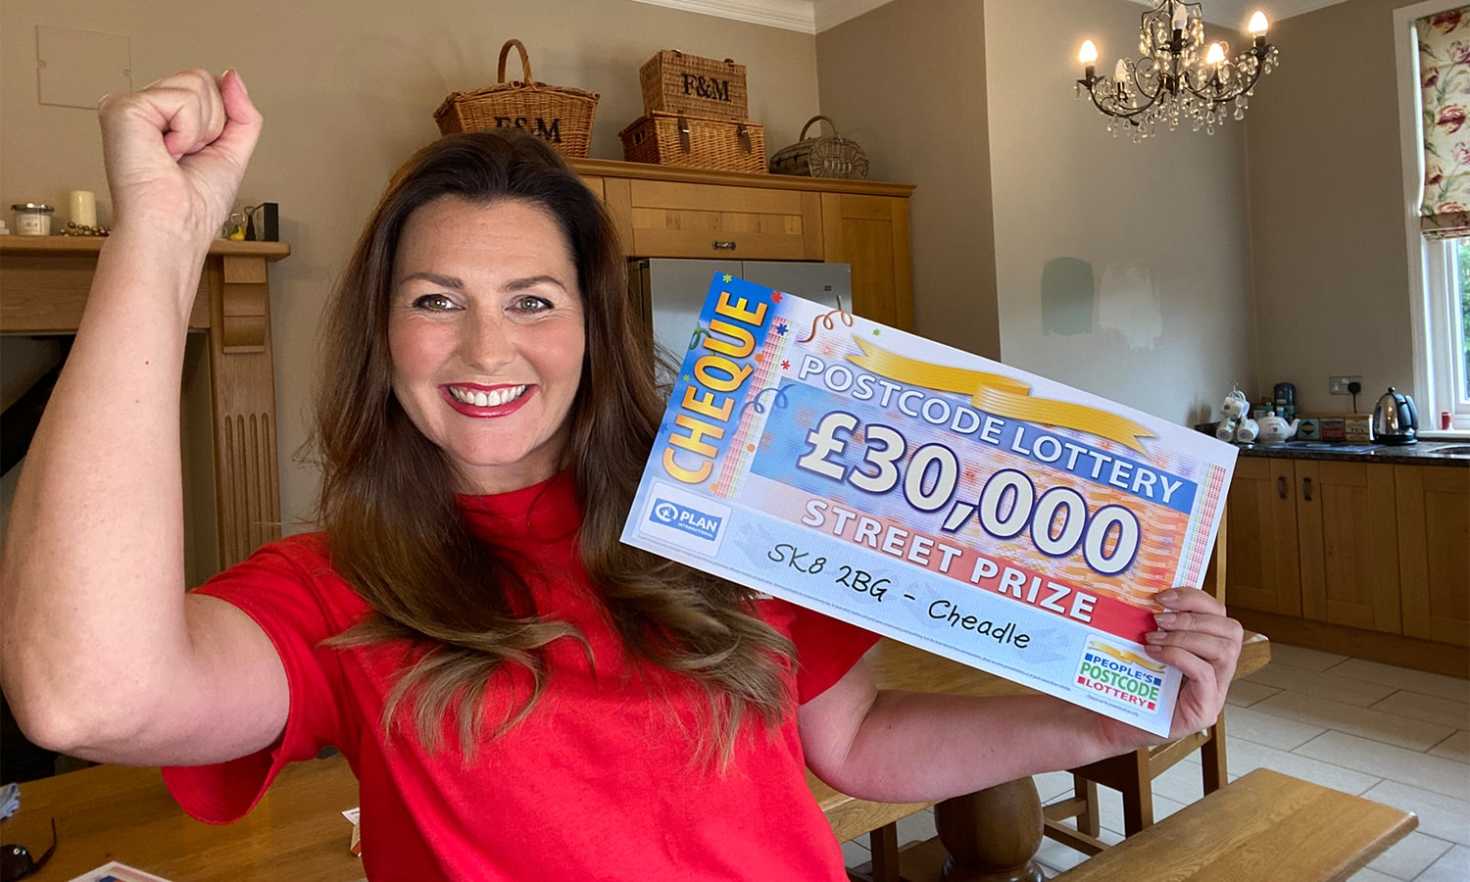 Today's £30,000 Street Prizes are heading to ten lucky winners in Cheadle